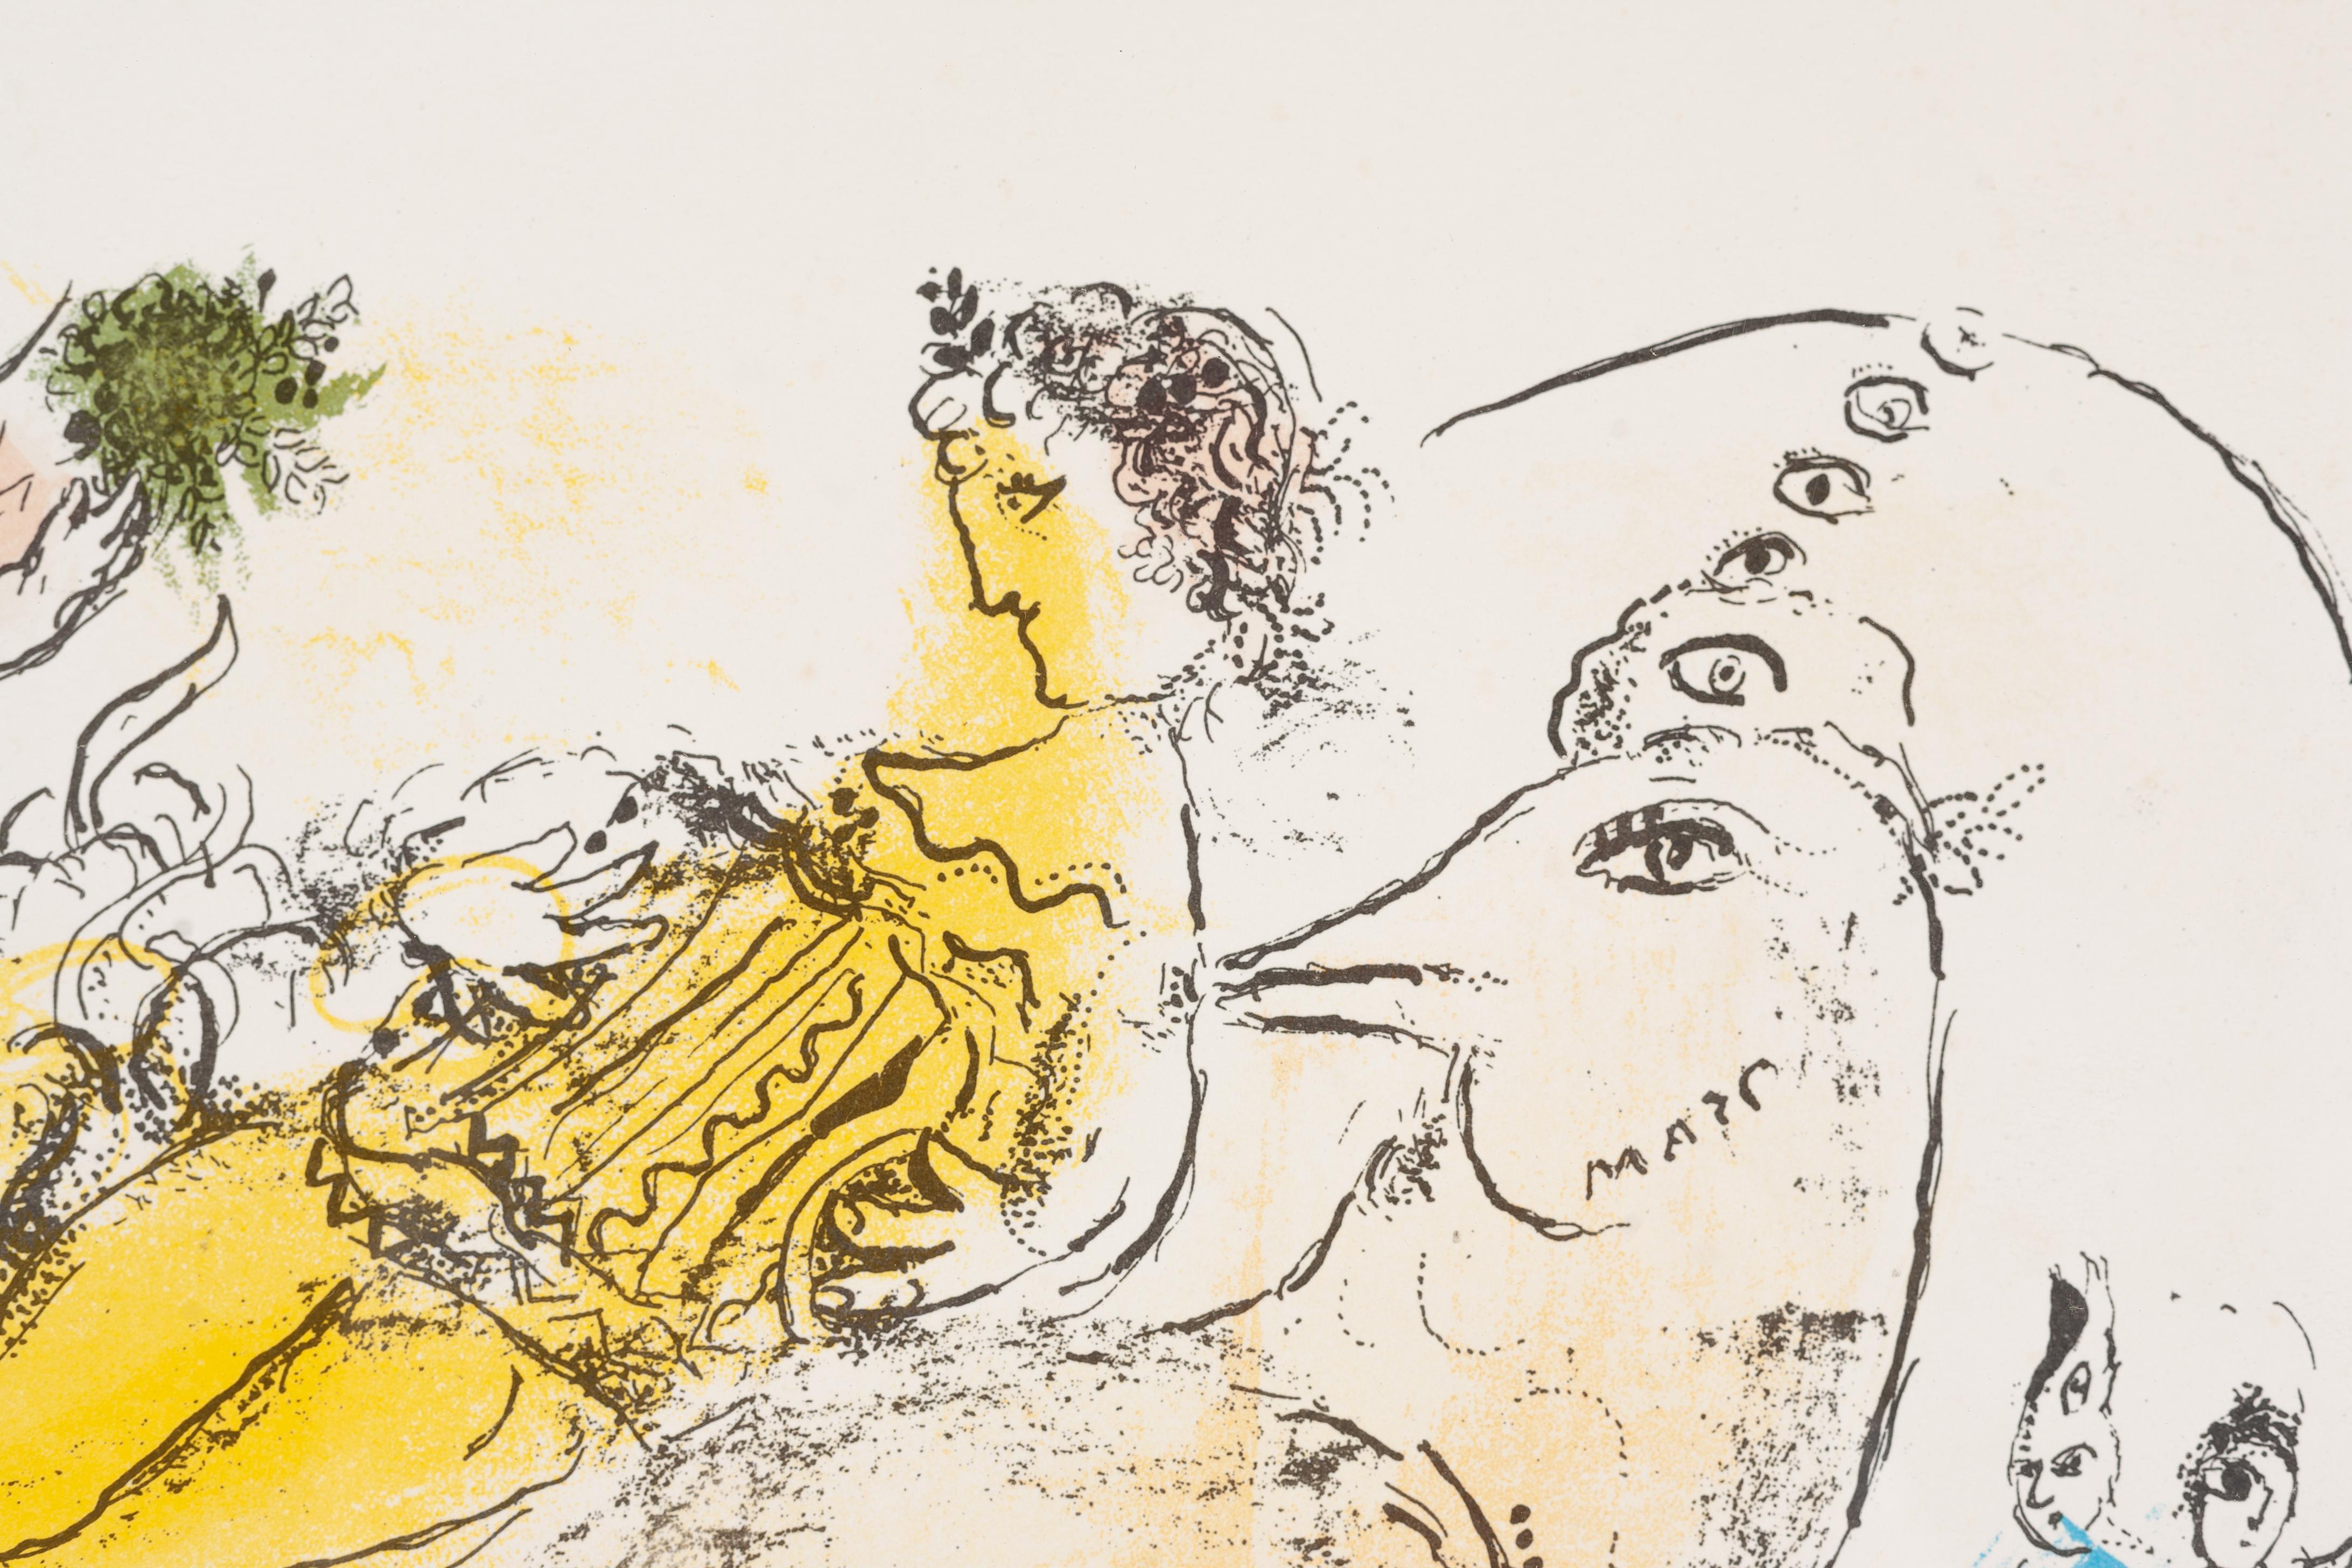 MARC CHAGALL
The Accordionist
Lithograph on paper

Ed. Ed. 28/90

14 x 18.5 inches

Framed: 29.75 x 34.5 inches